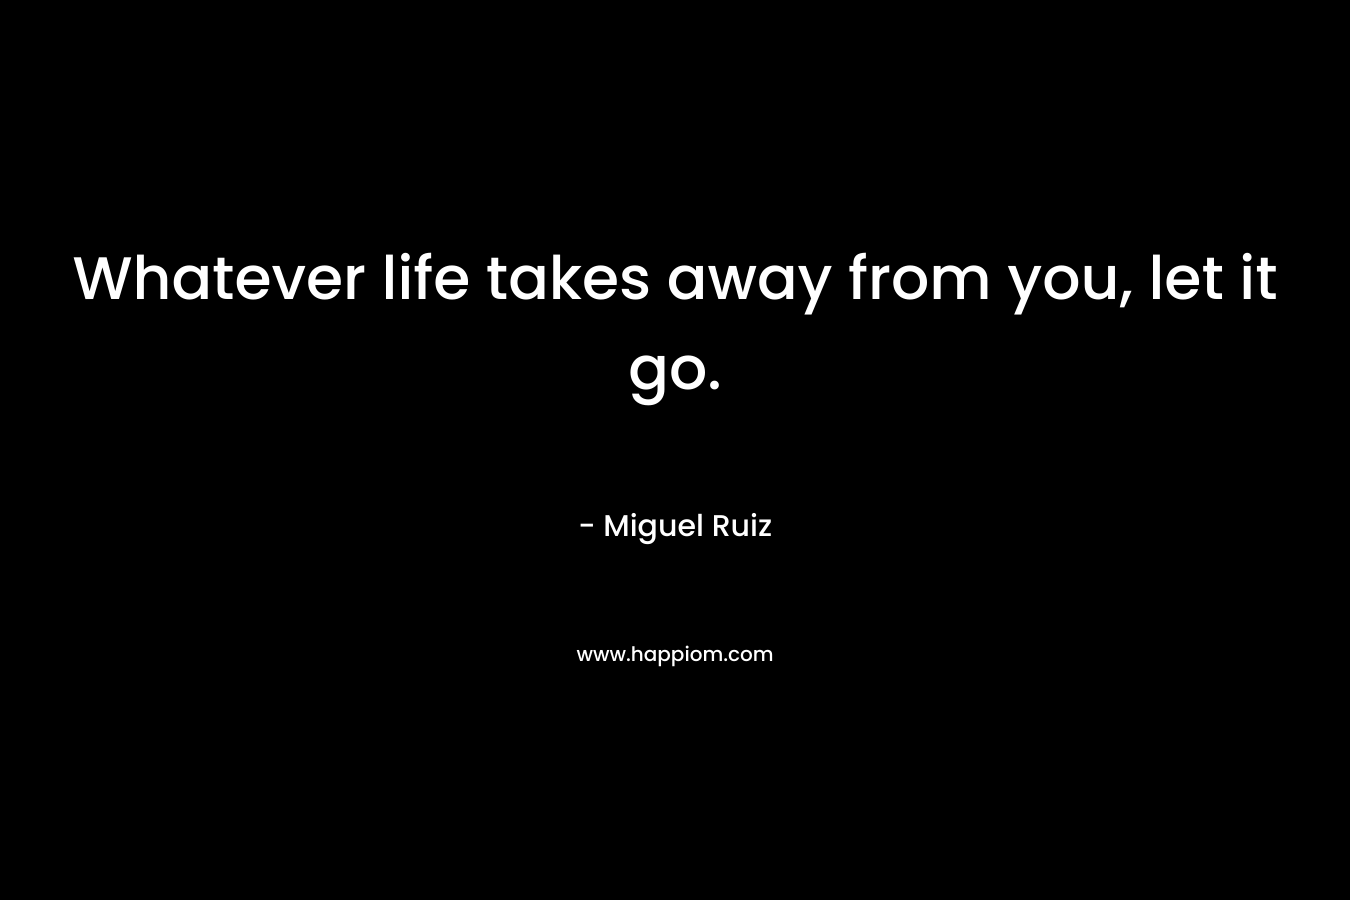 Whatever life takes away from you, let it go.